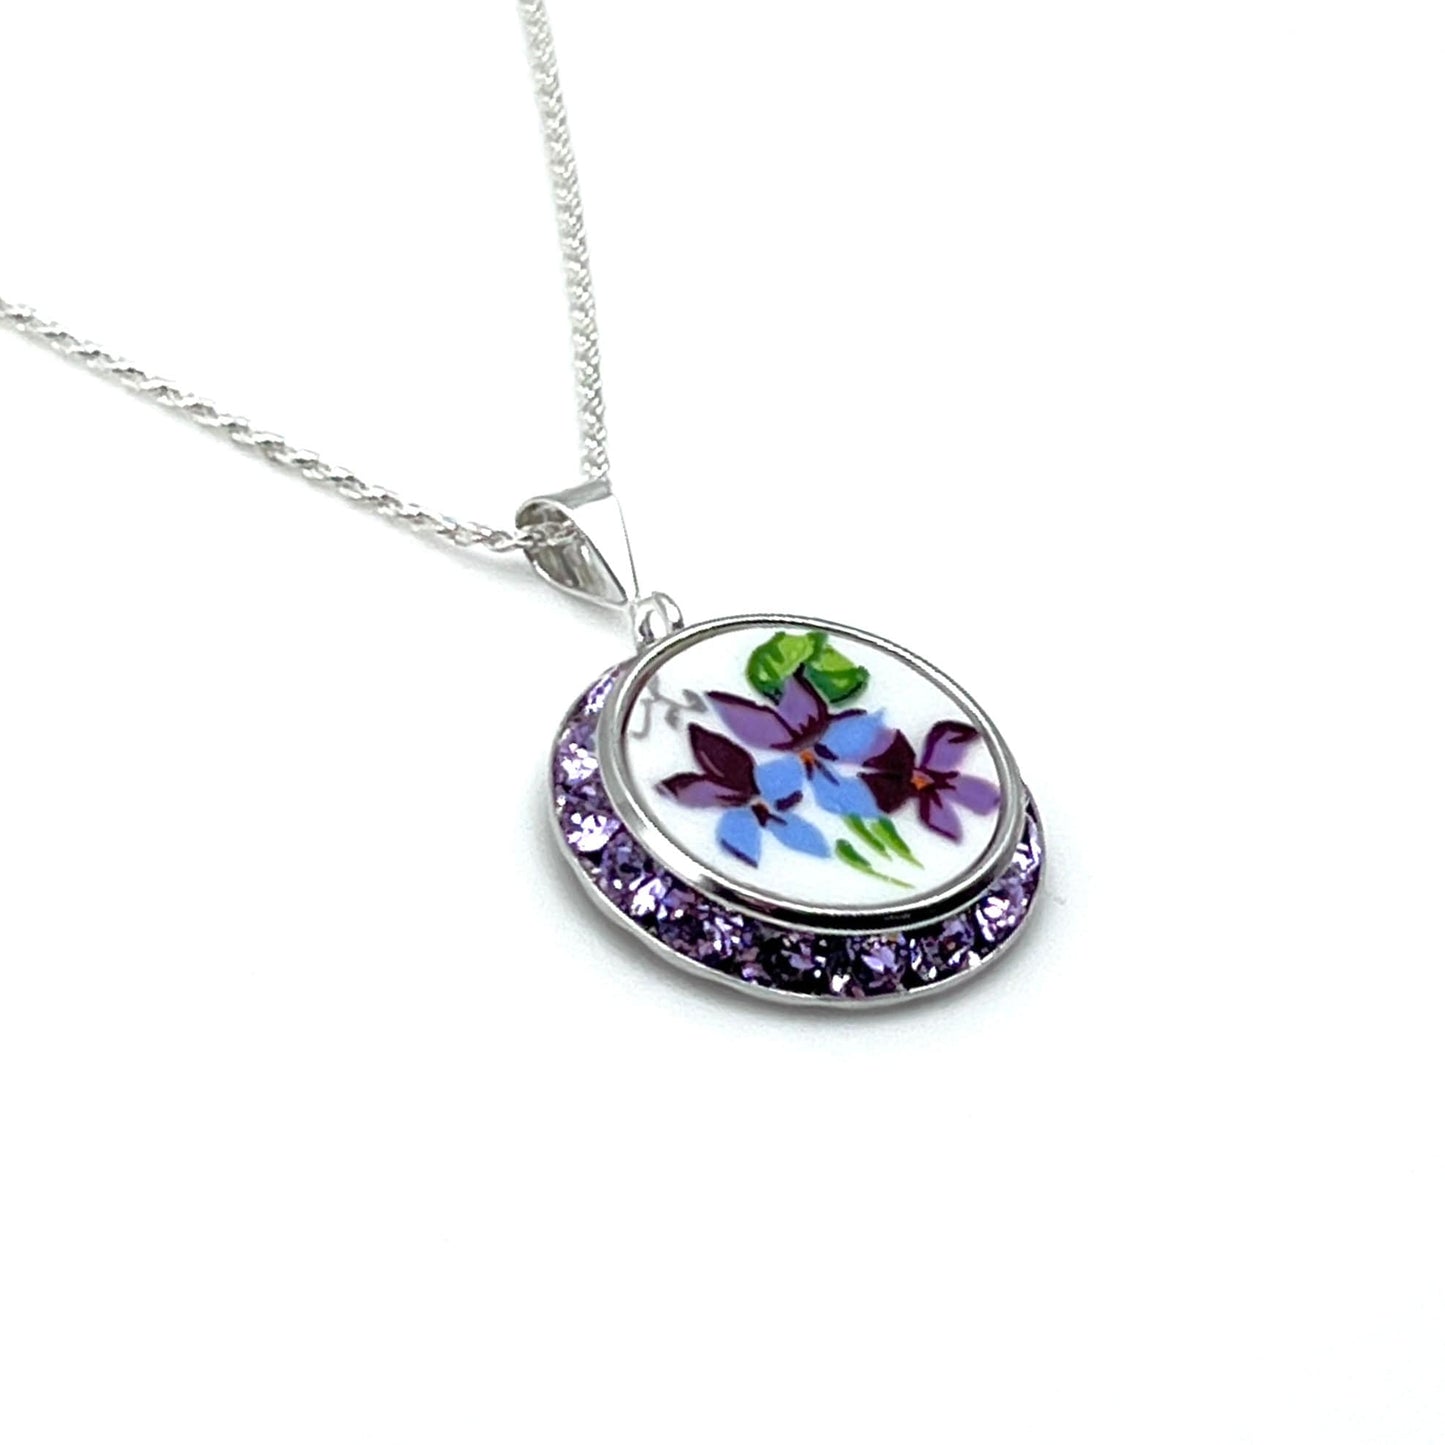 Purple Violet Crystal Necklace, Unique Gift for Mom, Grandmother Gift, Shabby Chic Jewelry, Broken China Jewelry